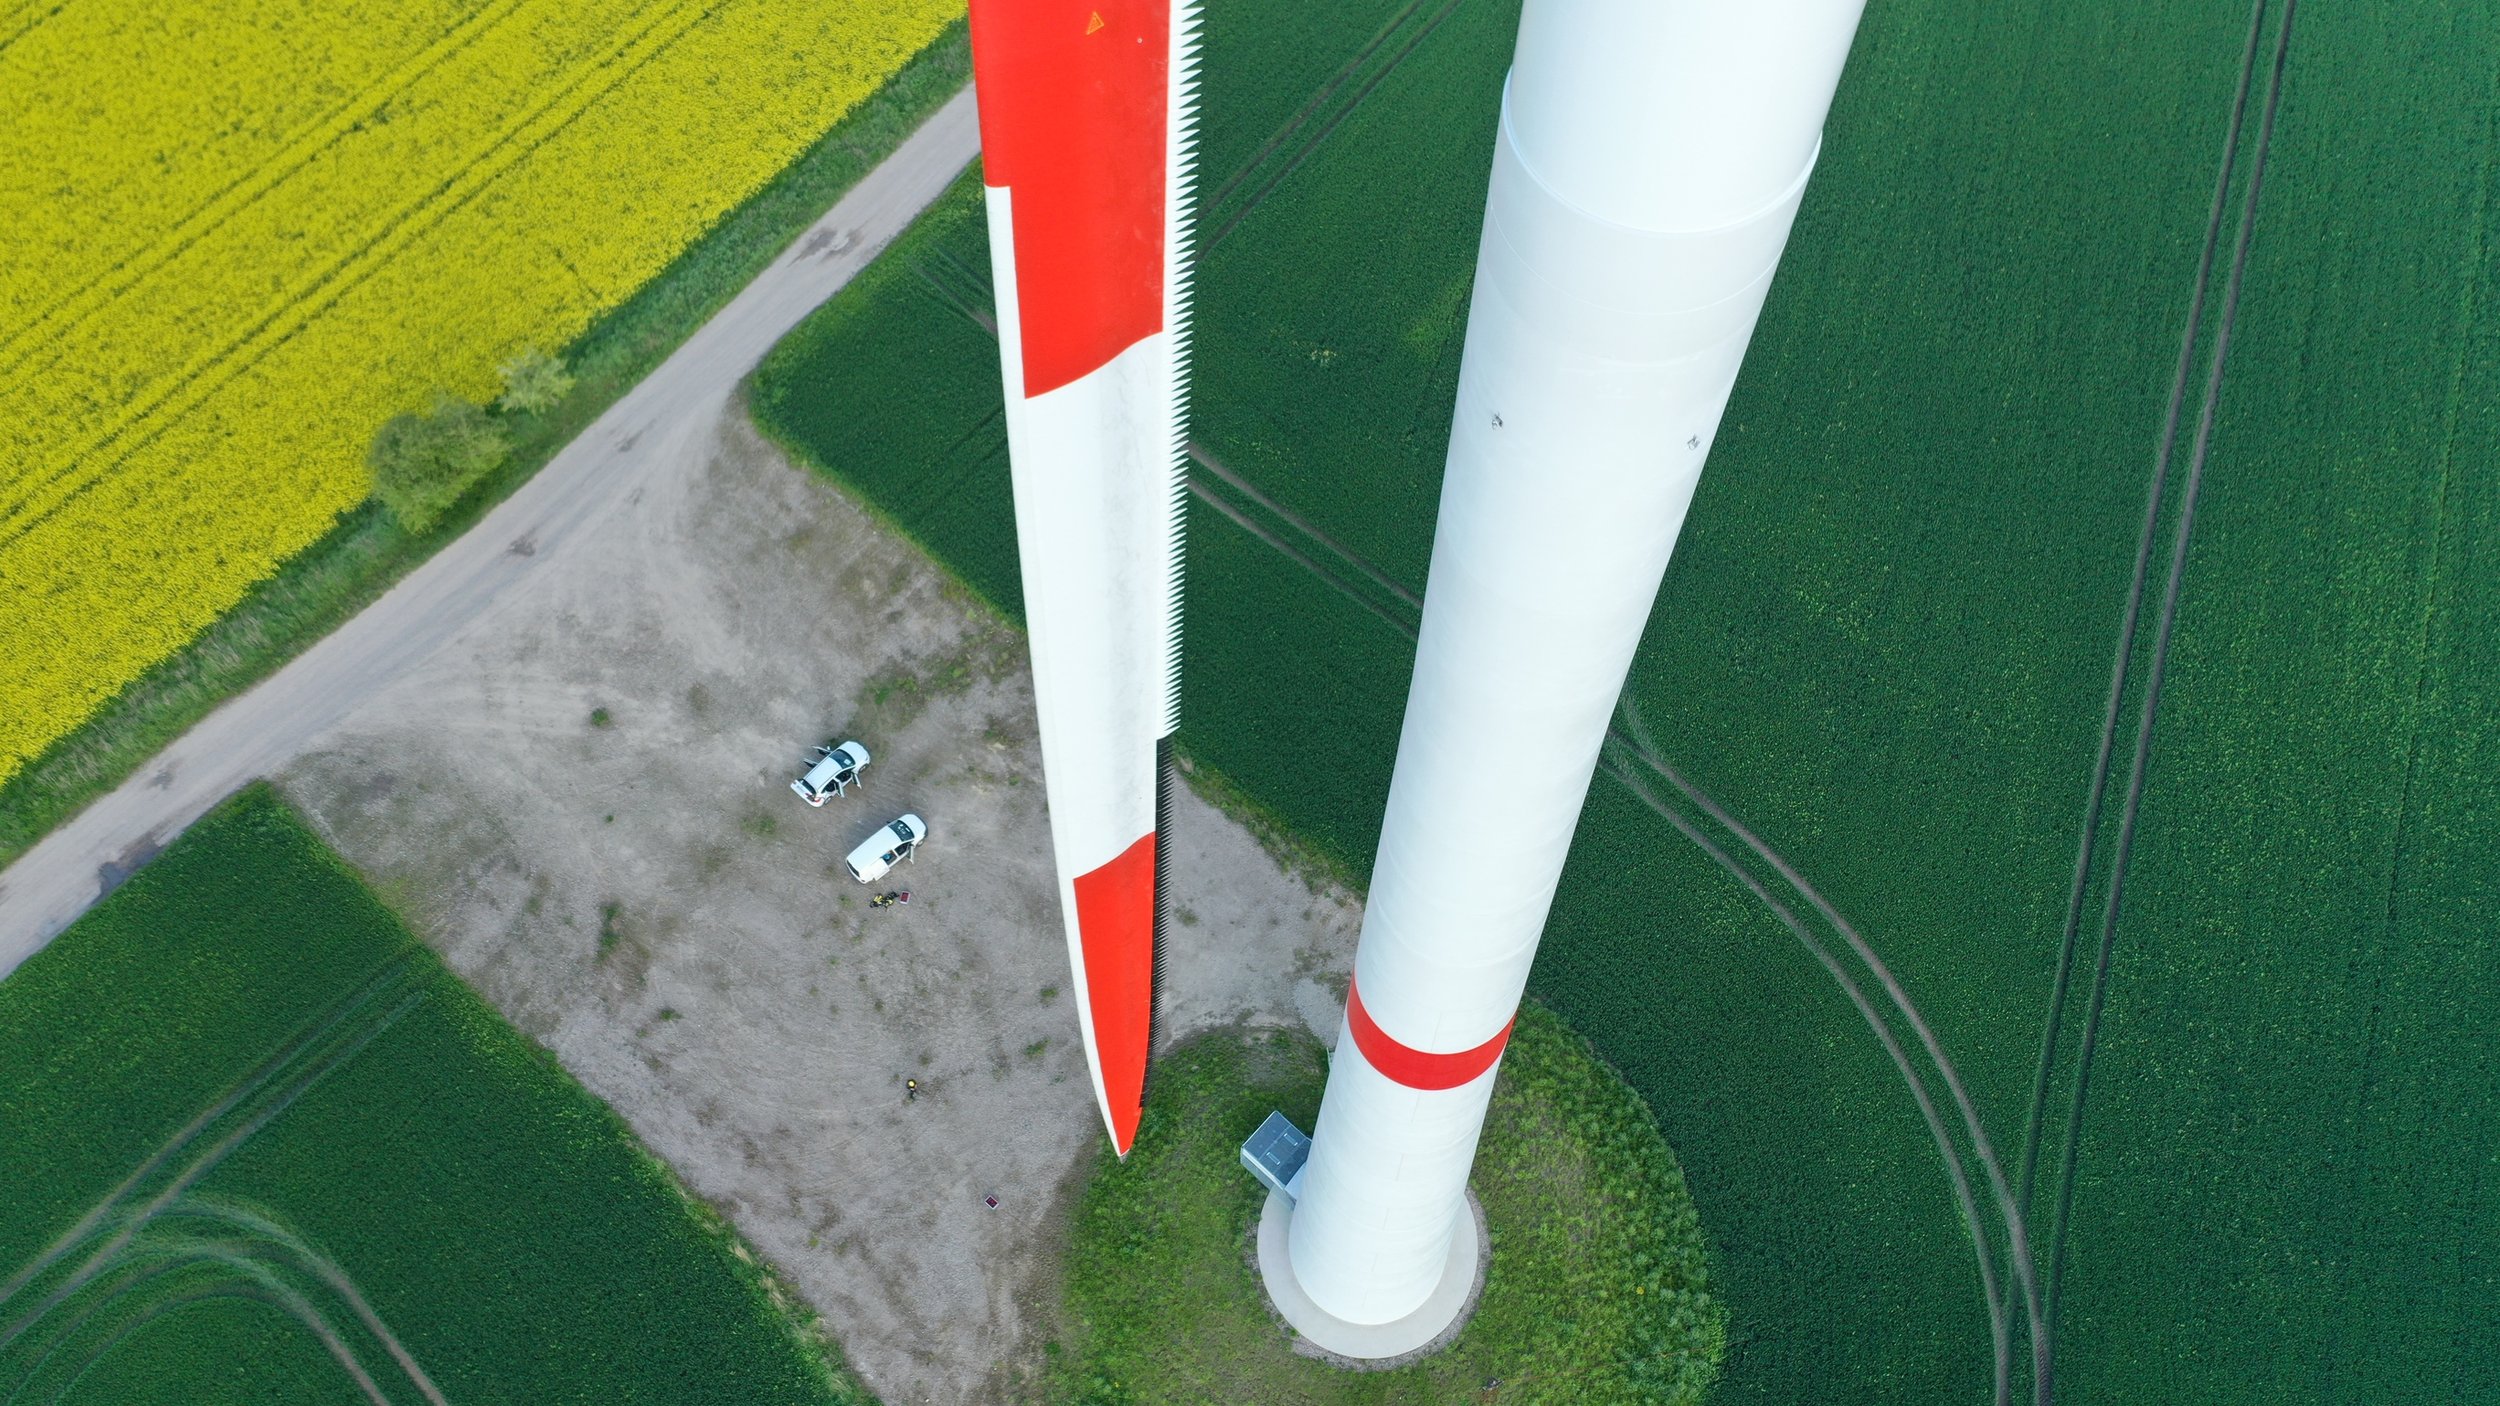   Wind turbine noise reduction   Between 1 - 3dB(A) less noise.   Contact  